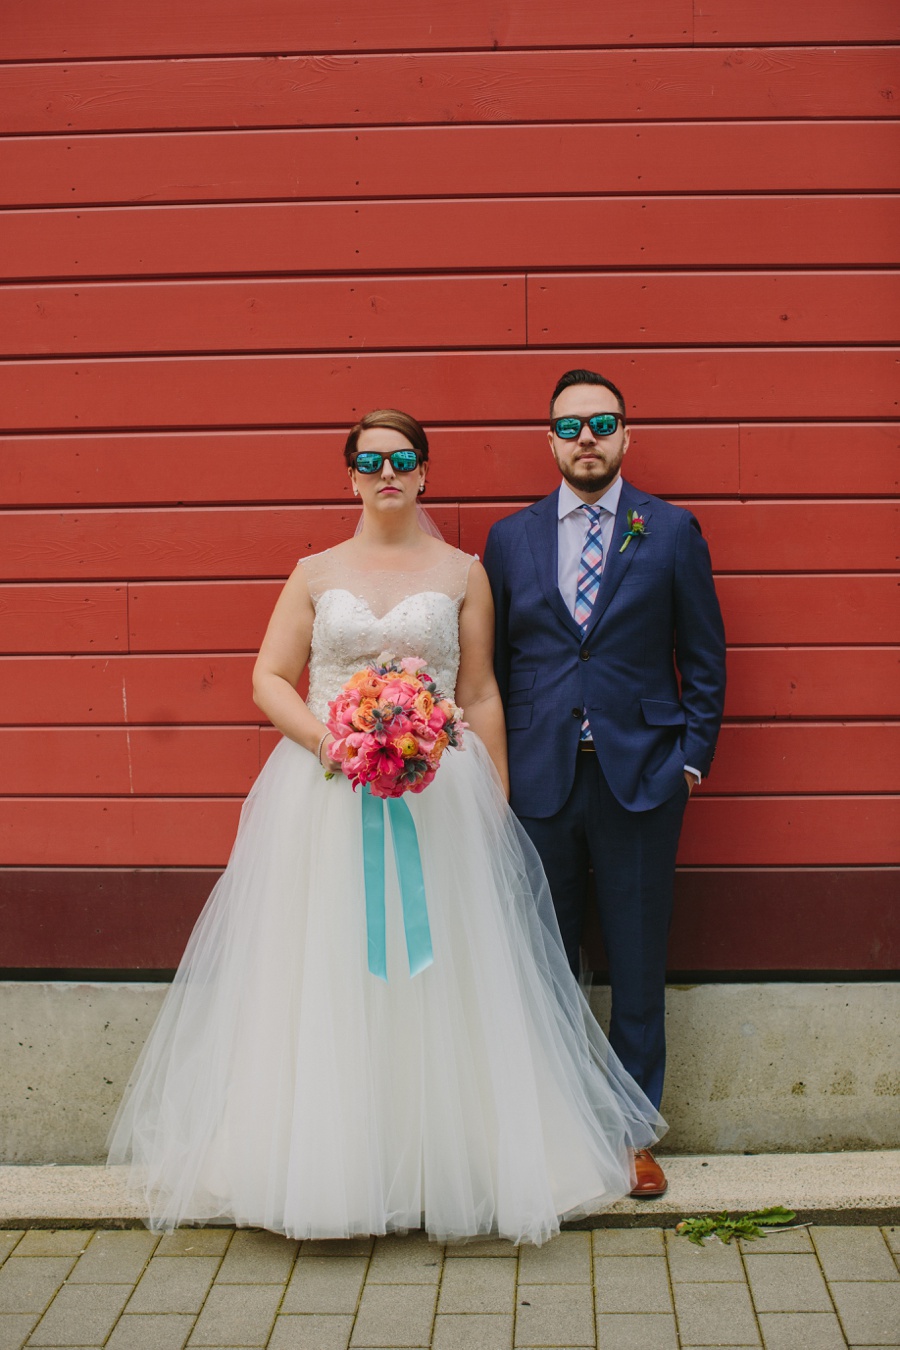 Vancouver Bride and Groom with Sunglasses